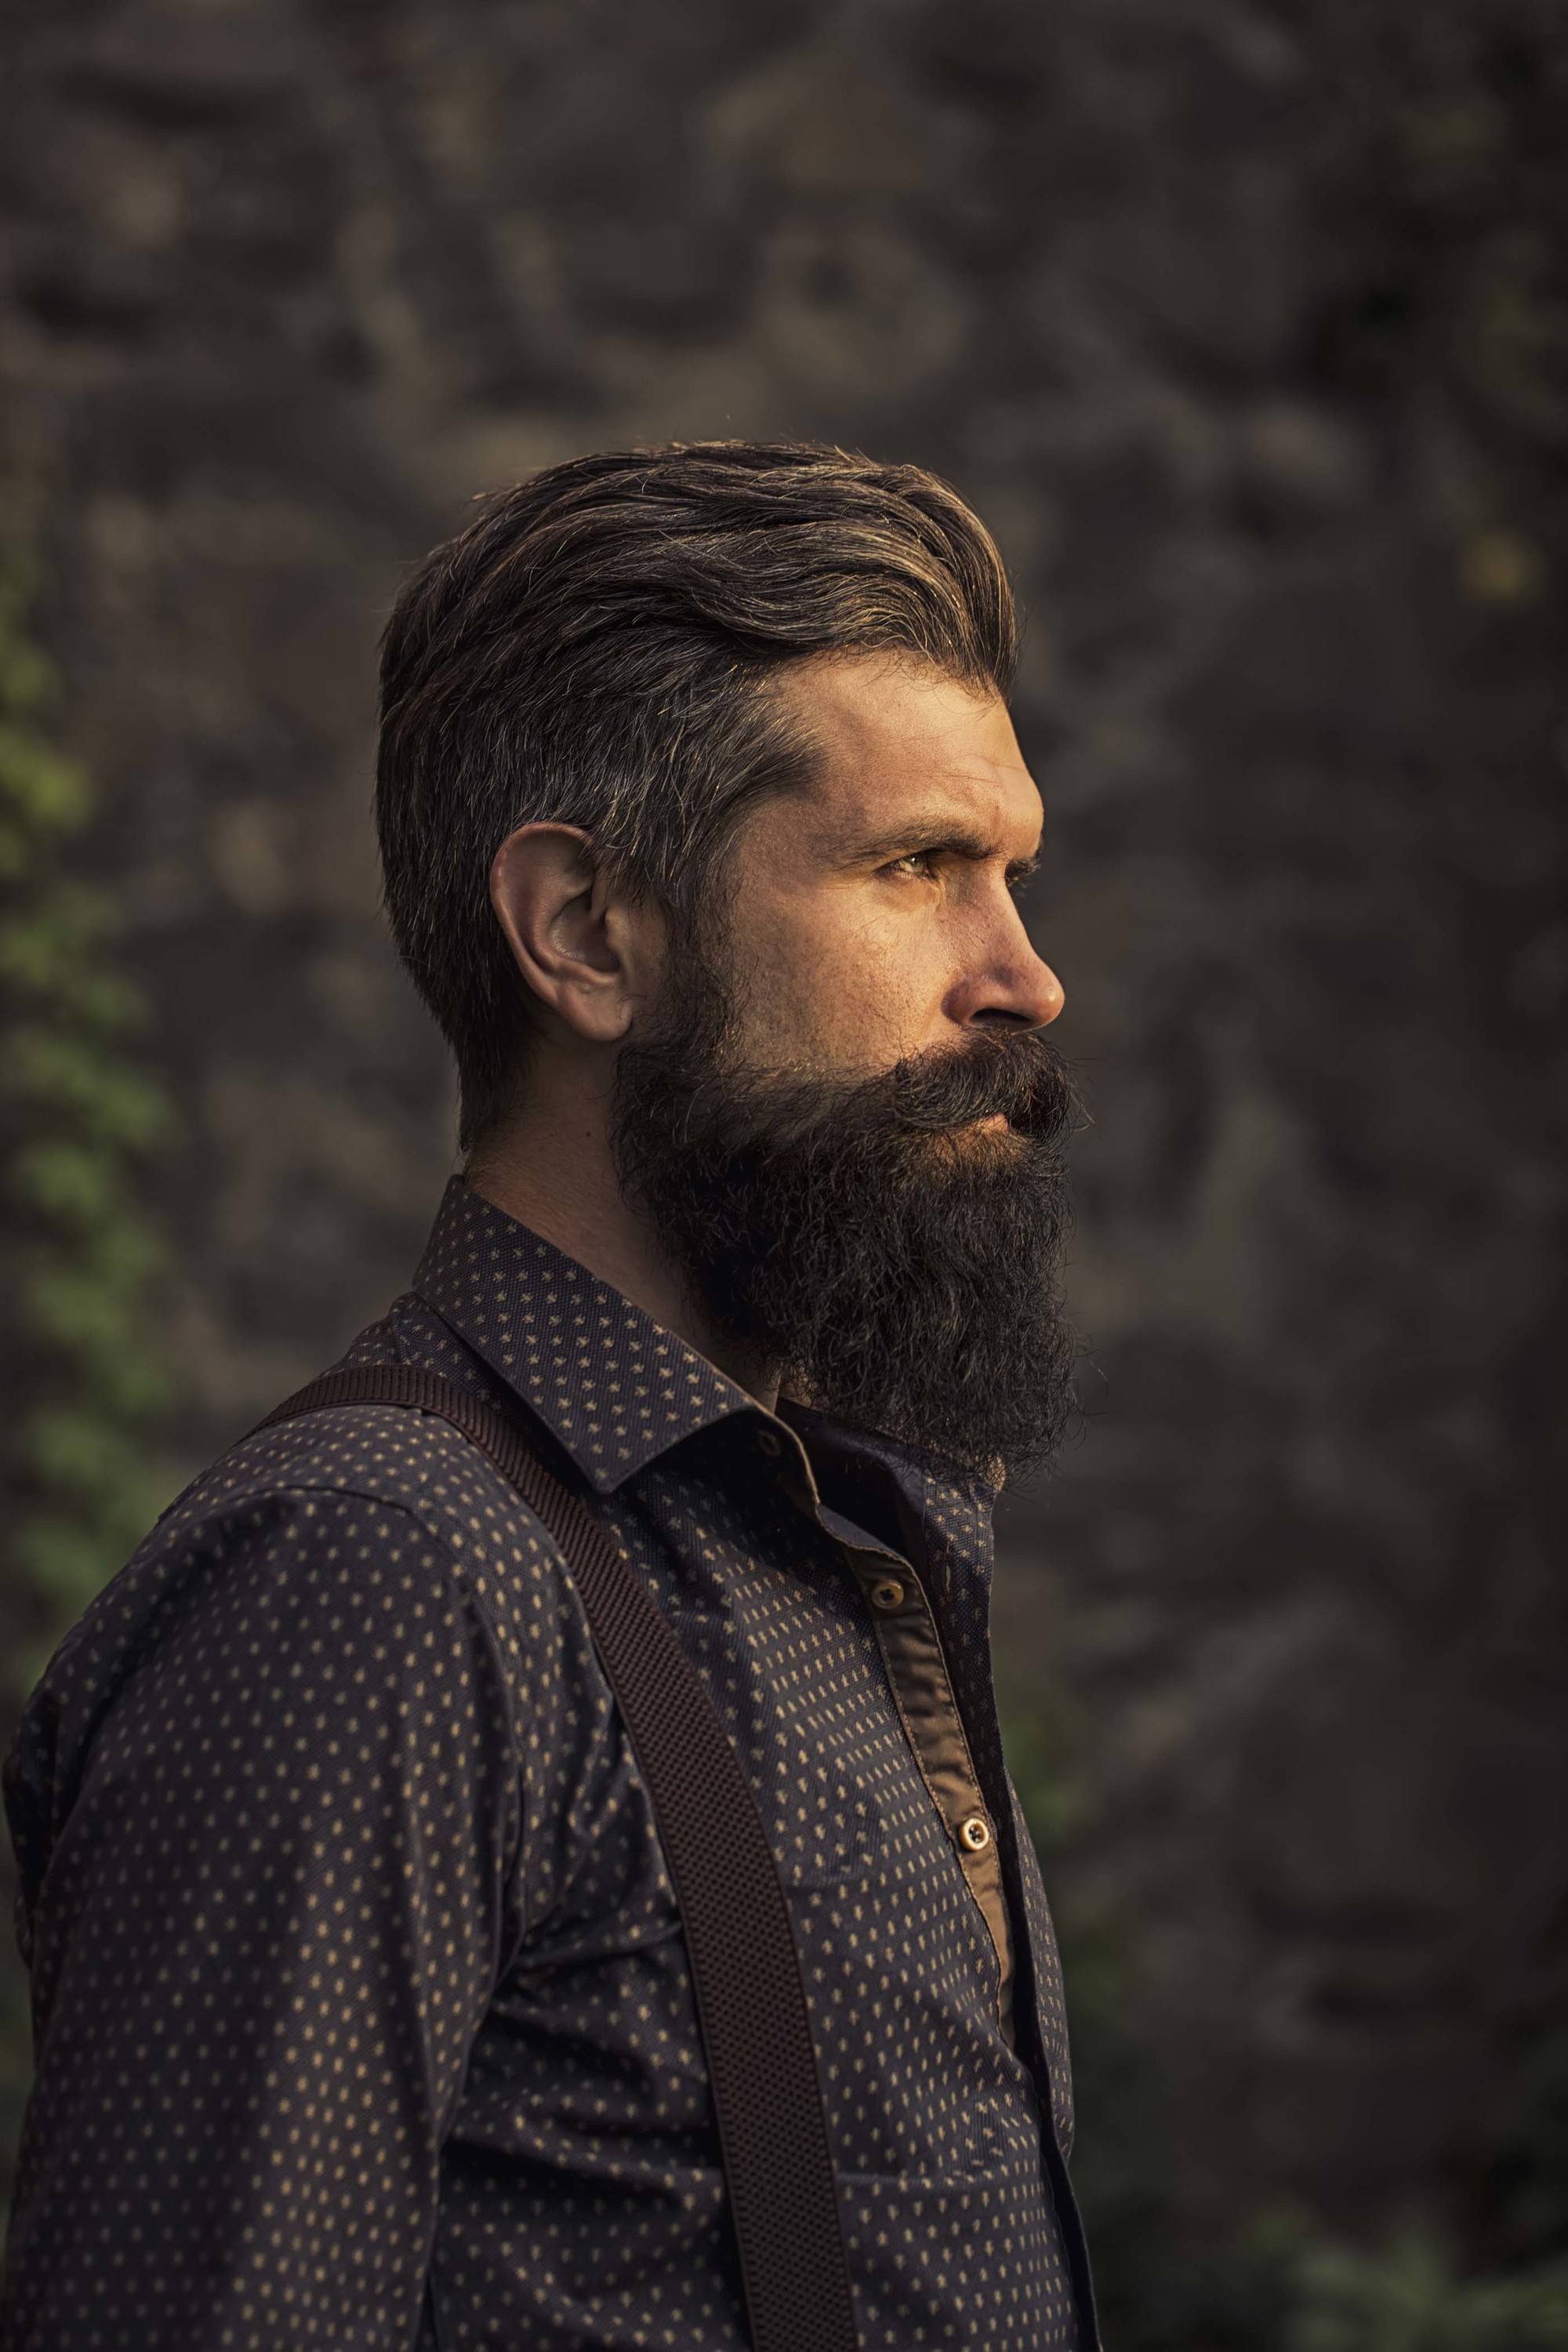 Men's hairstyles 2015: gray hair is in fashion! | City Magazine